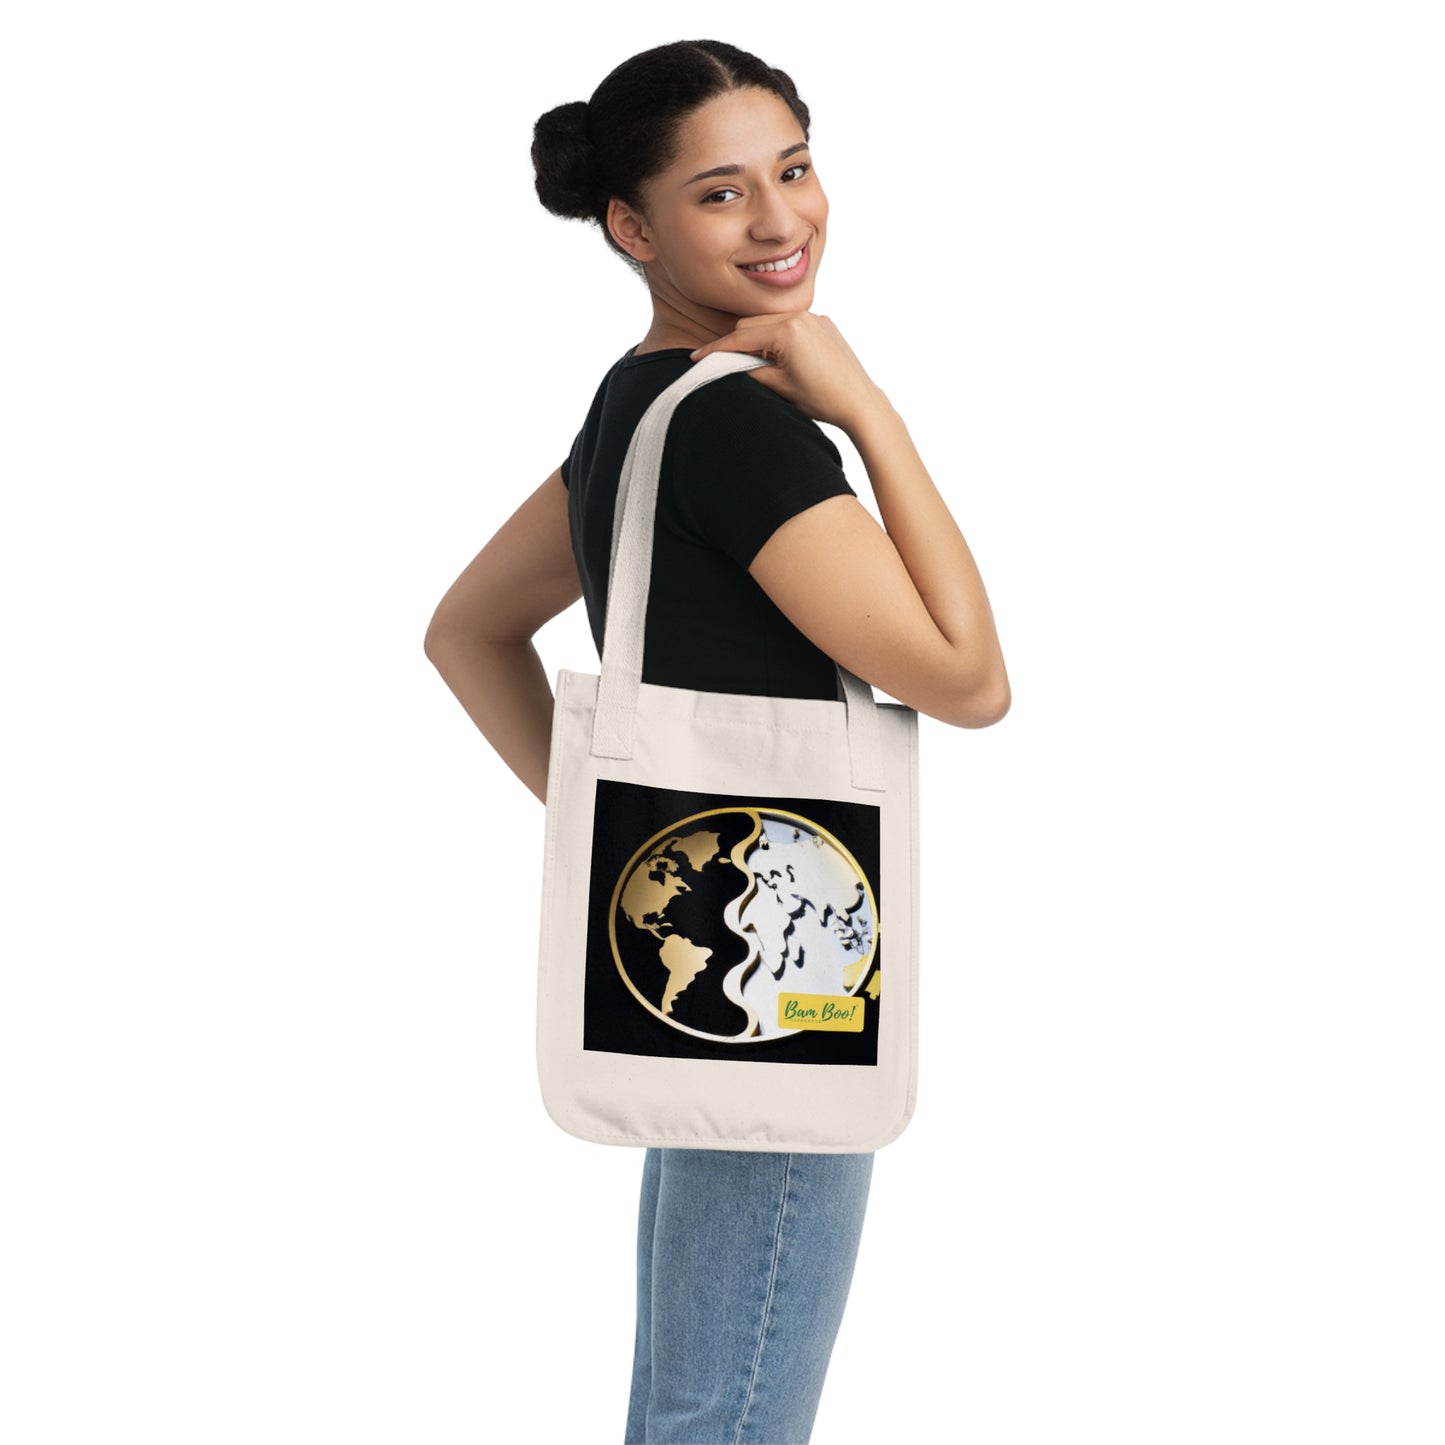 "United in Diversity: A Photomontage Exploration" - Bam Boo! Lifestyle Eco-friendly Tote Bag